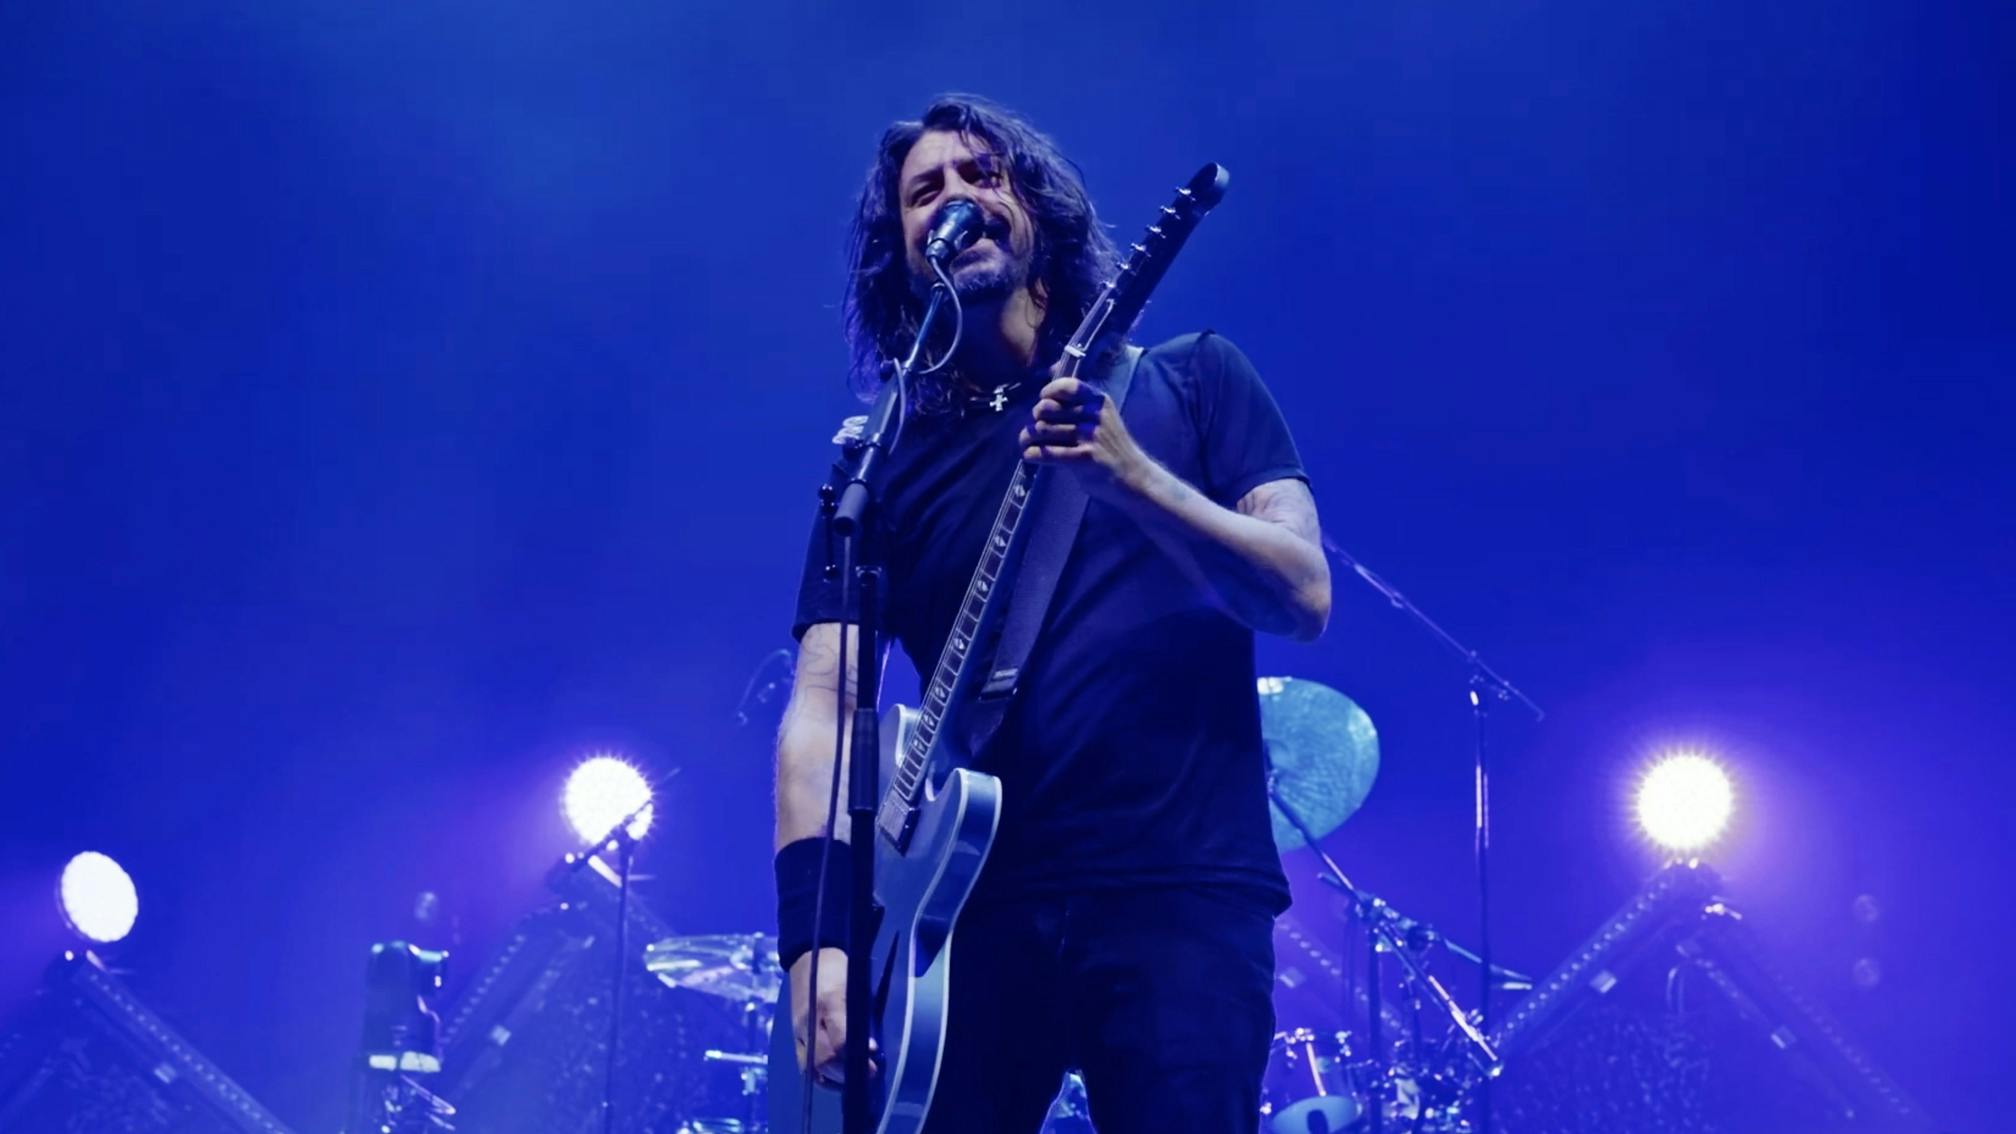 Watch cathartic The Day The Music Came Back mini-doc featuring Foo Fighters